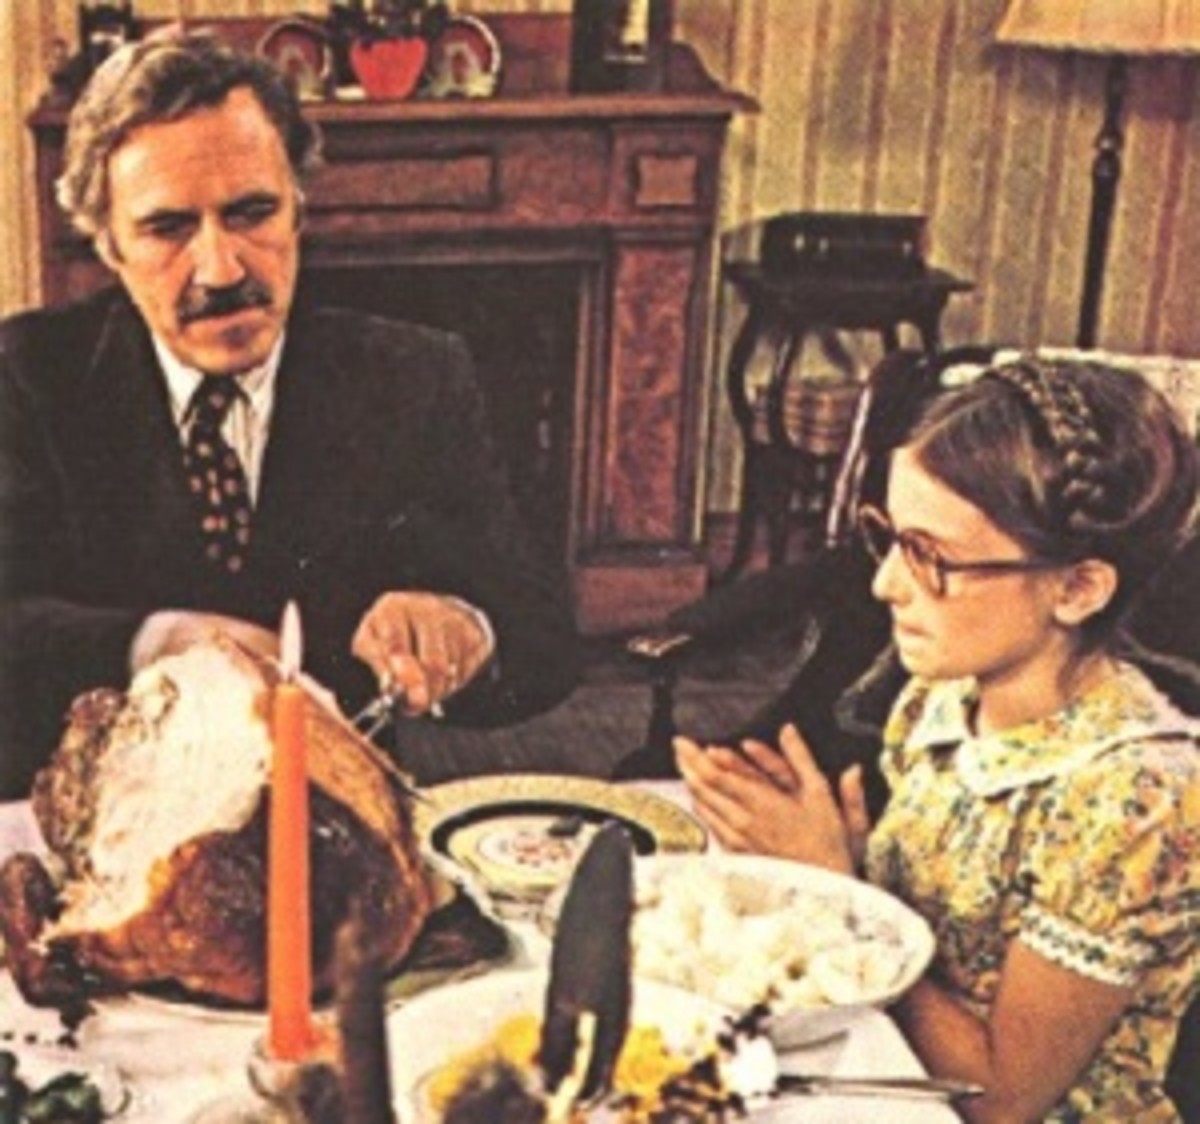 As James (Jason Robards) carves more turkey, Addie (Lisa Lucas) hopes that it'll be a big piece